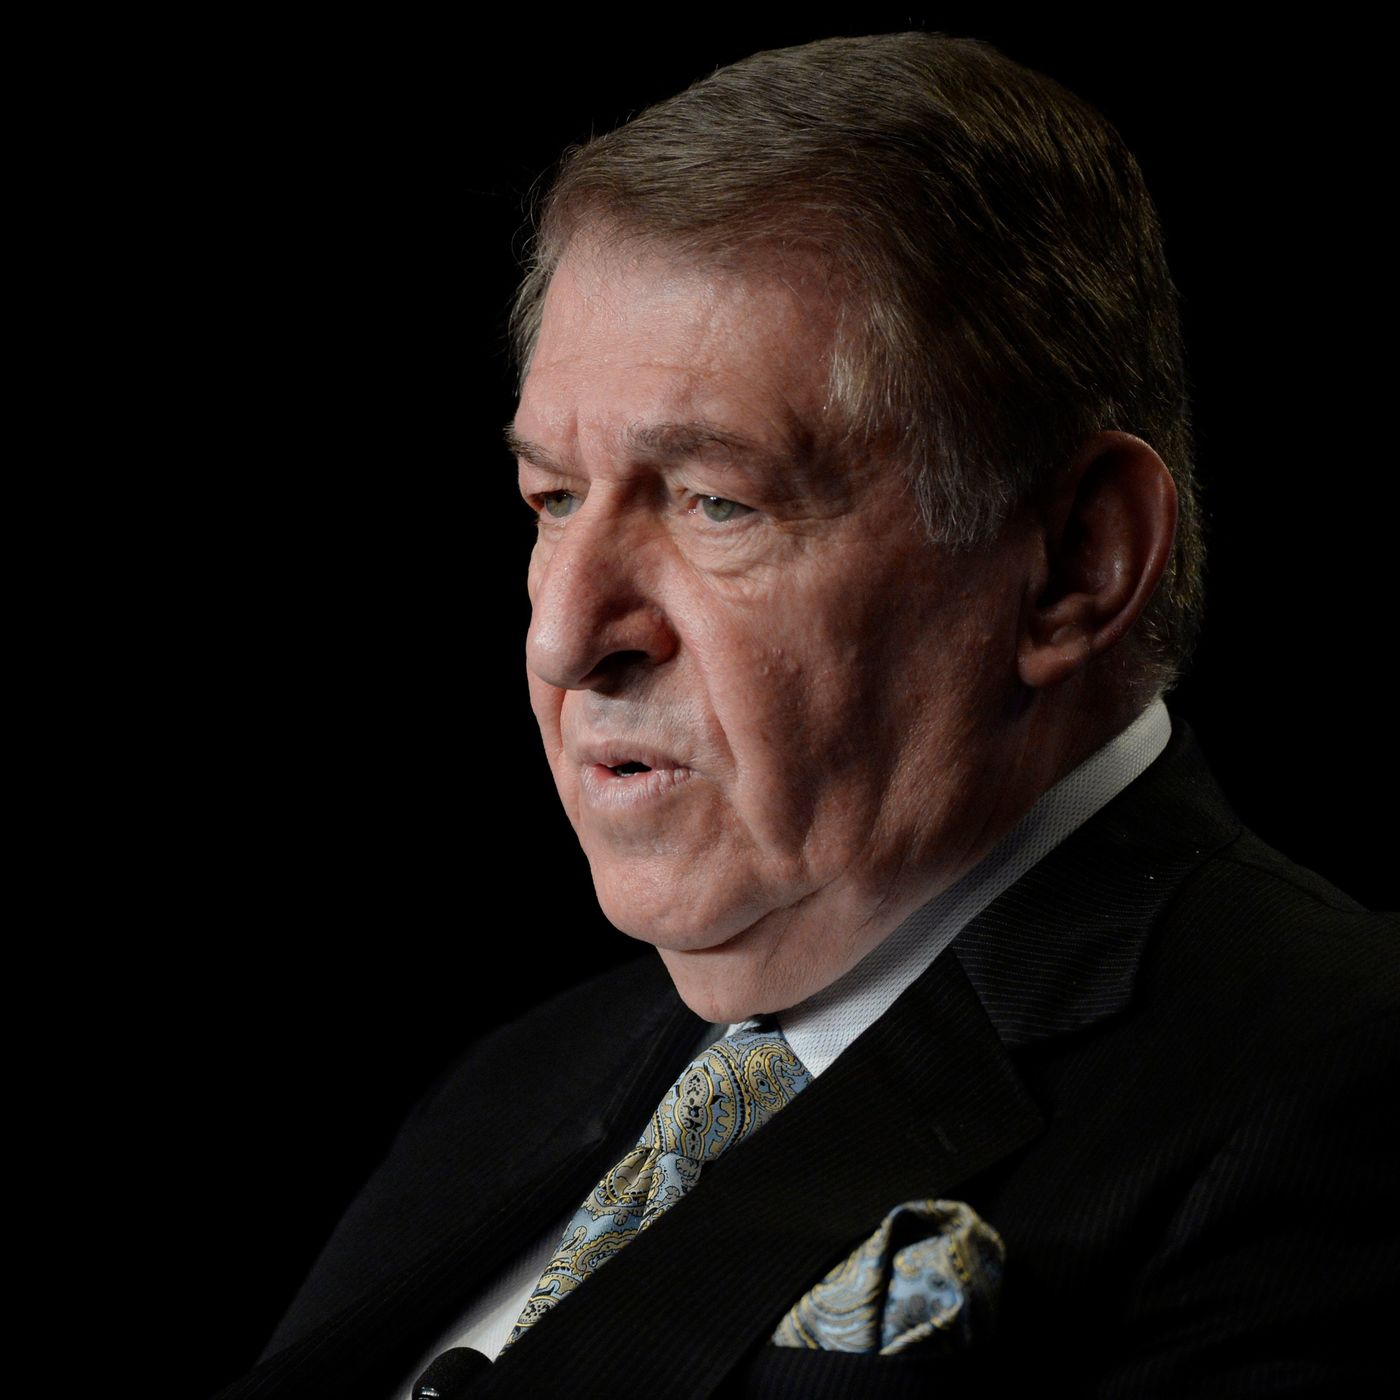 Jerry Colangelo on Olympics and NBA players